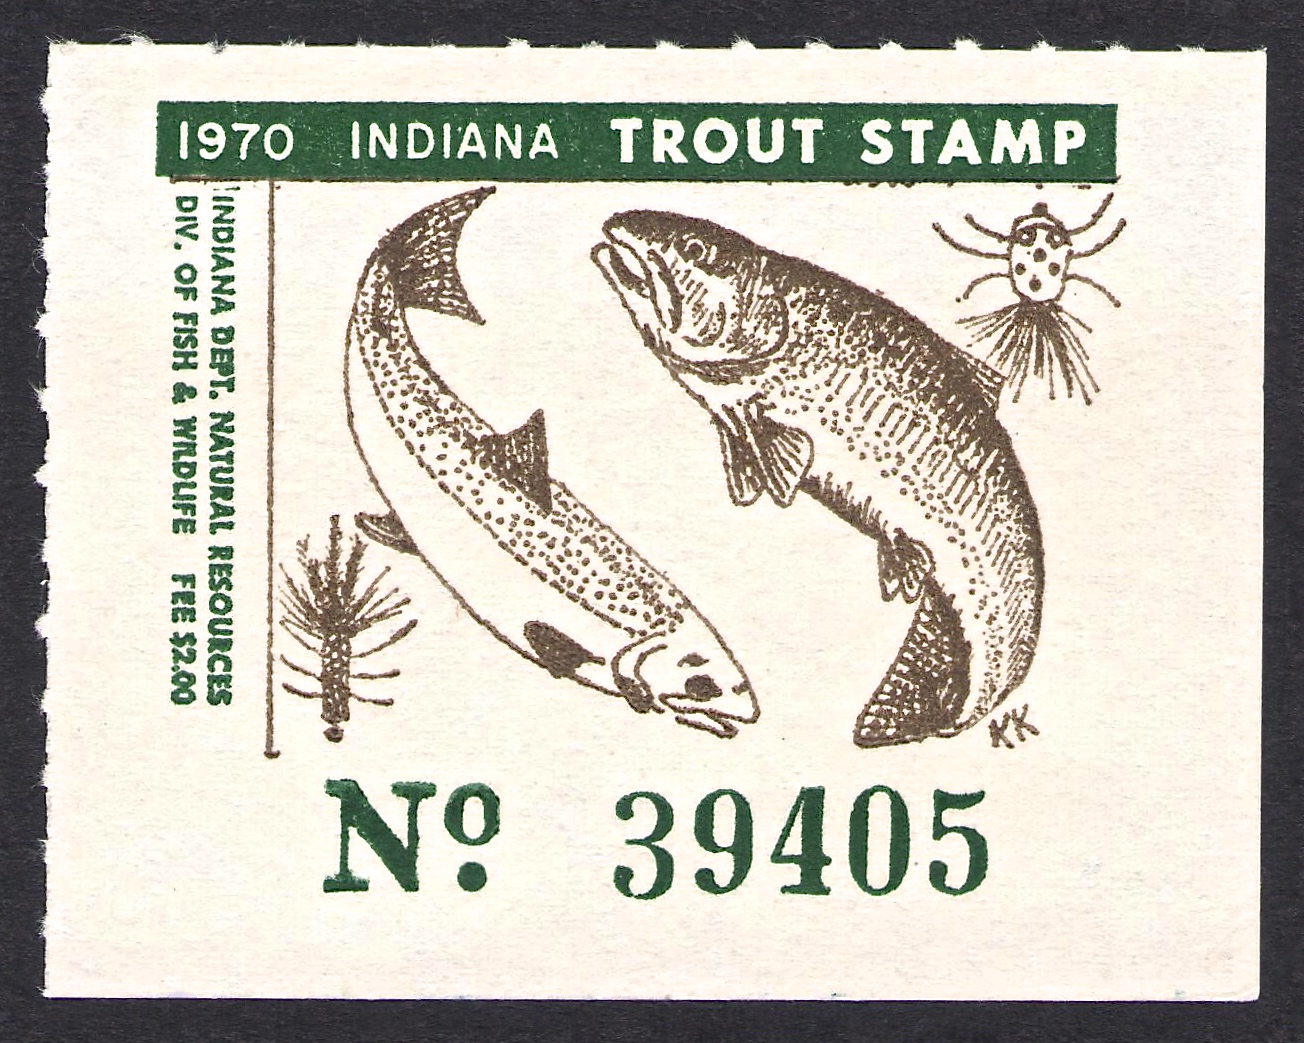 1970 Indiana Trout